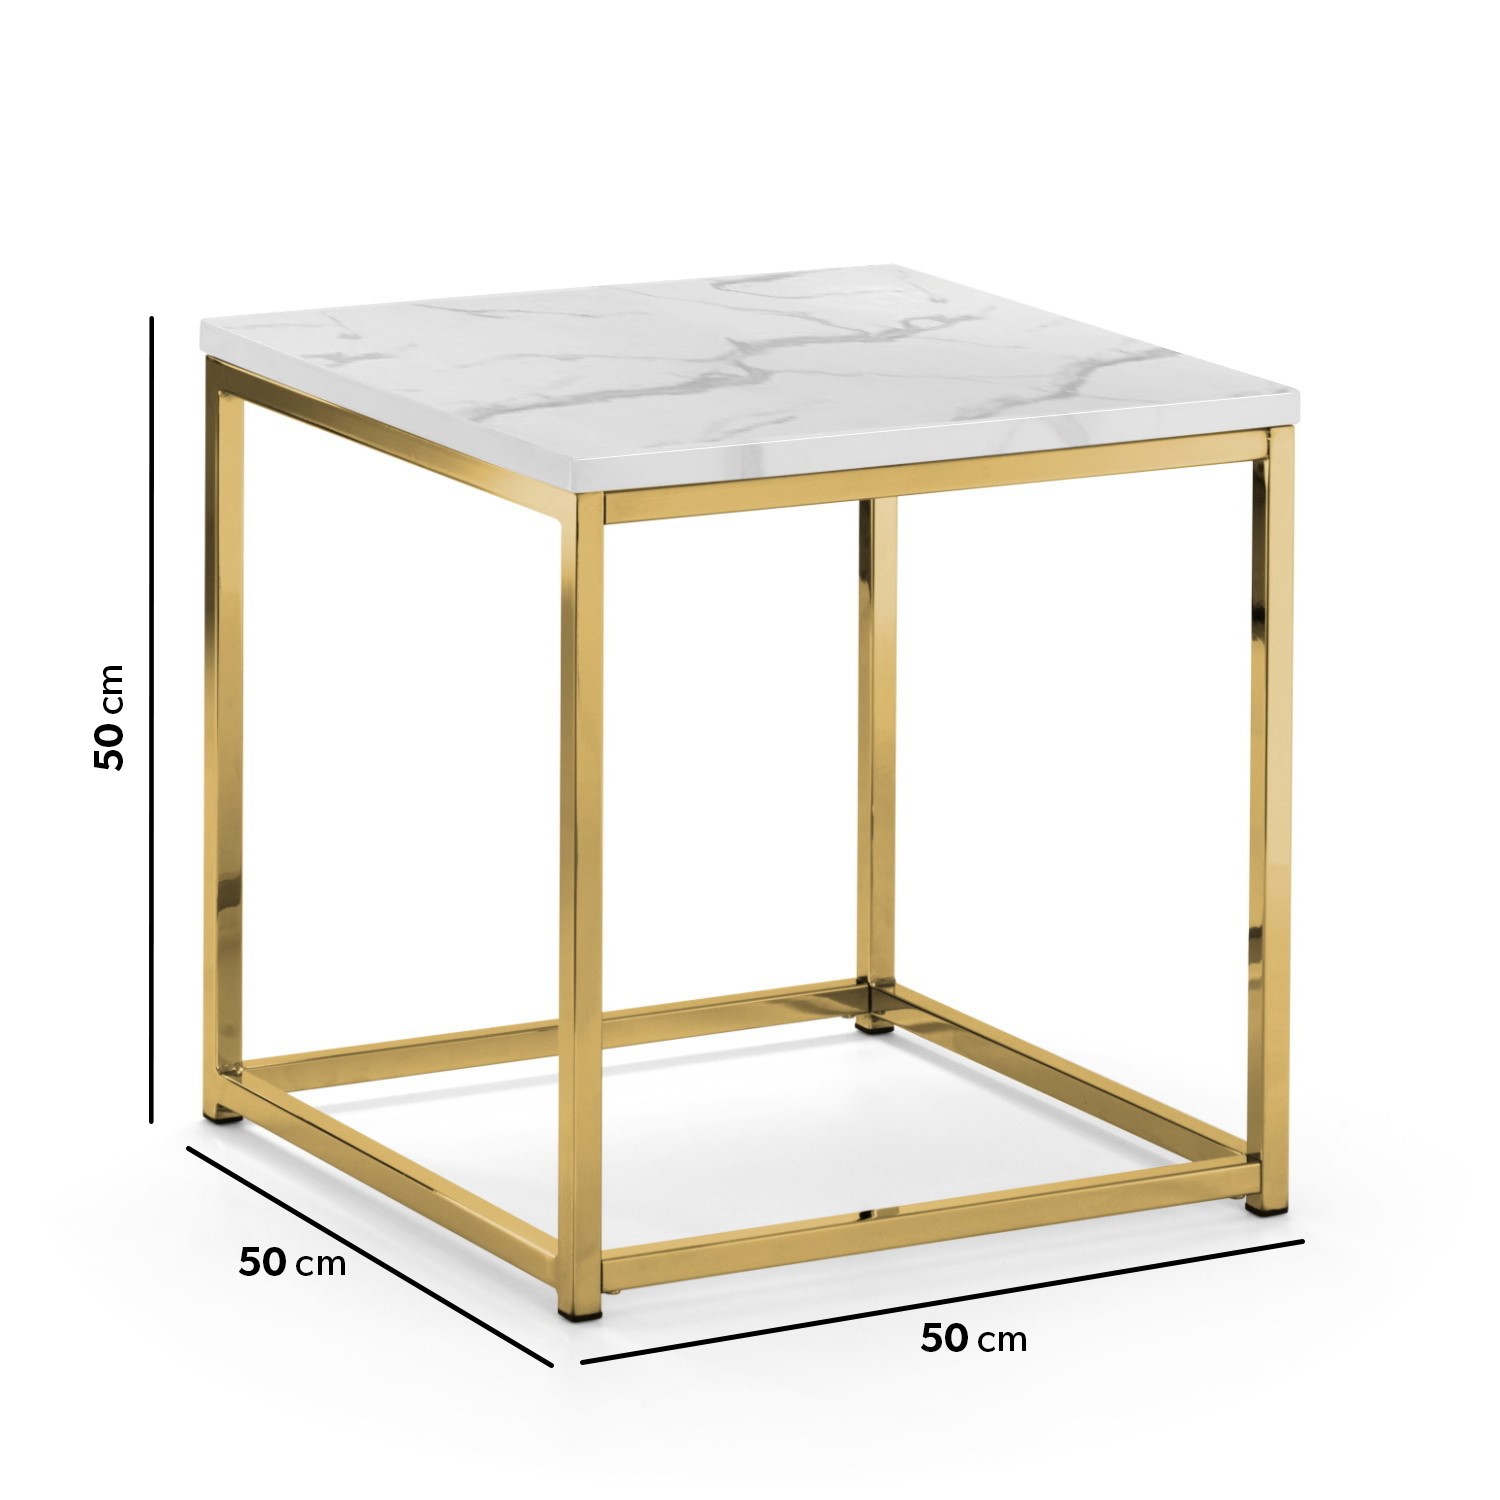 Read more about Marble top side table with gold legs julian bowen